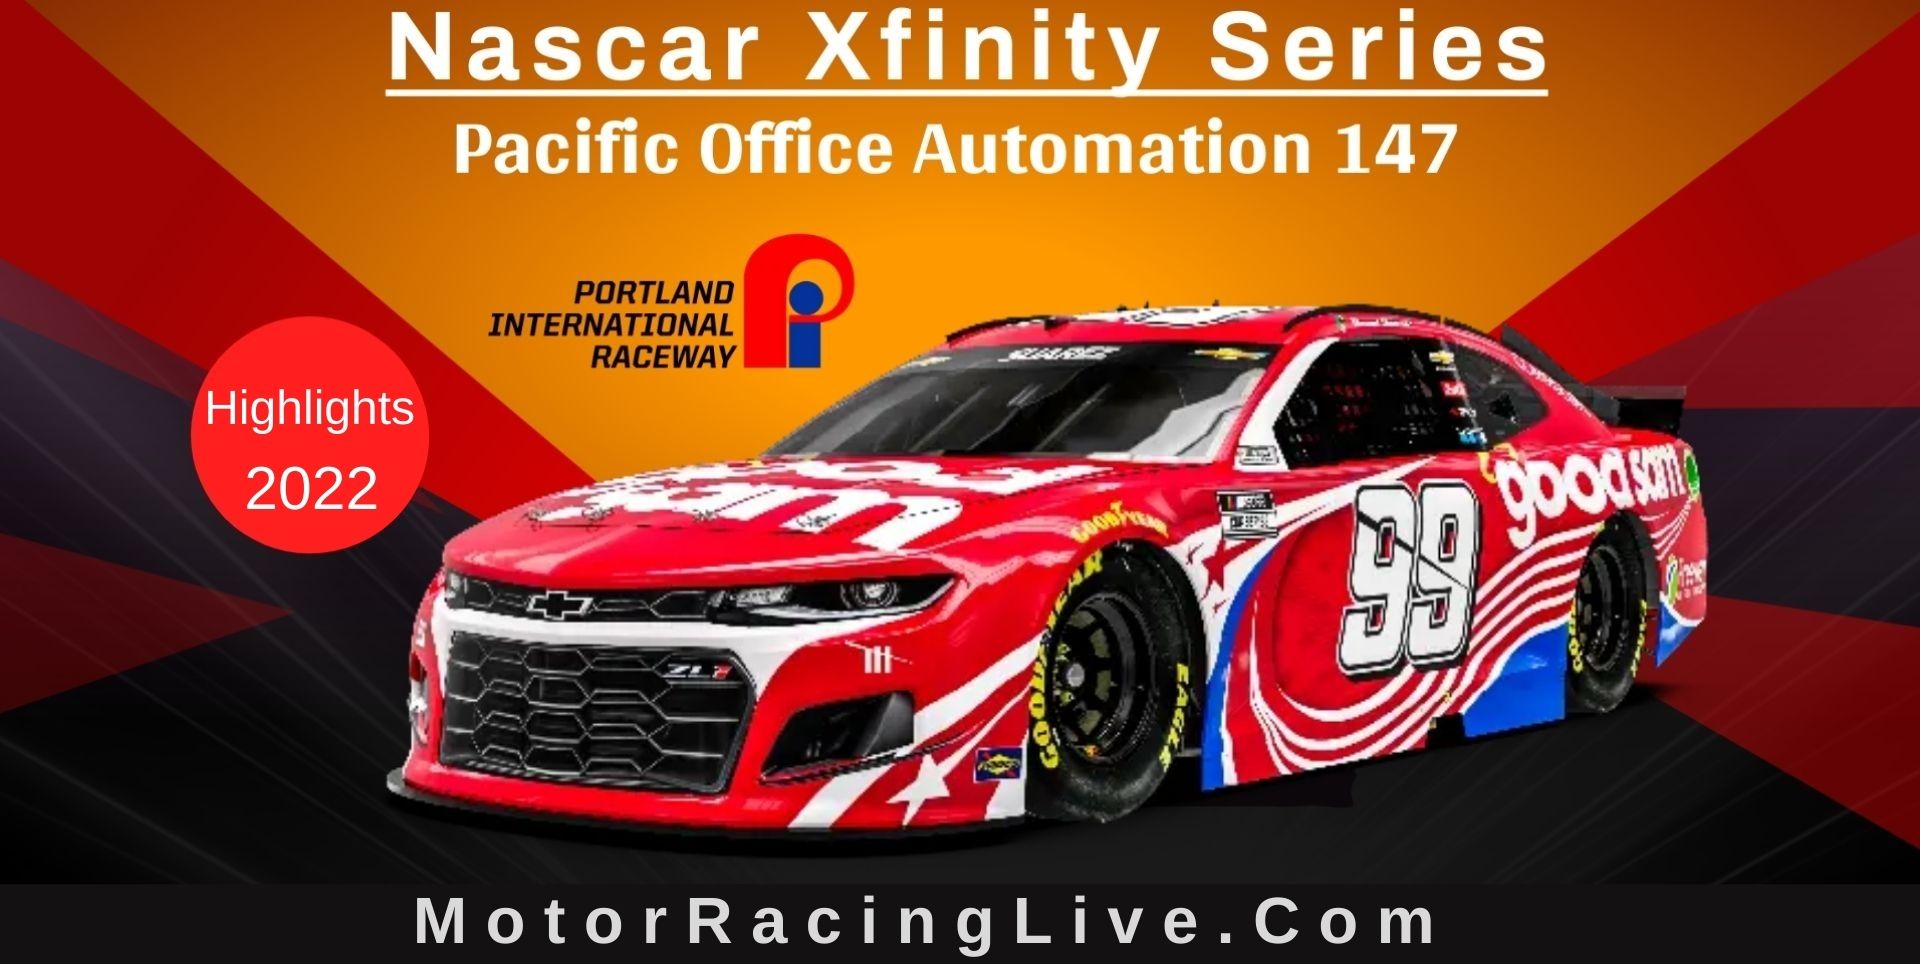 Pacific Office Automation 147 Highlights 2022 NASCAR Xfinity